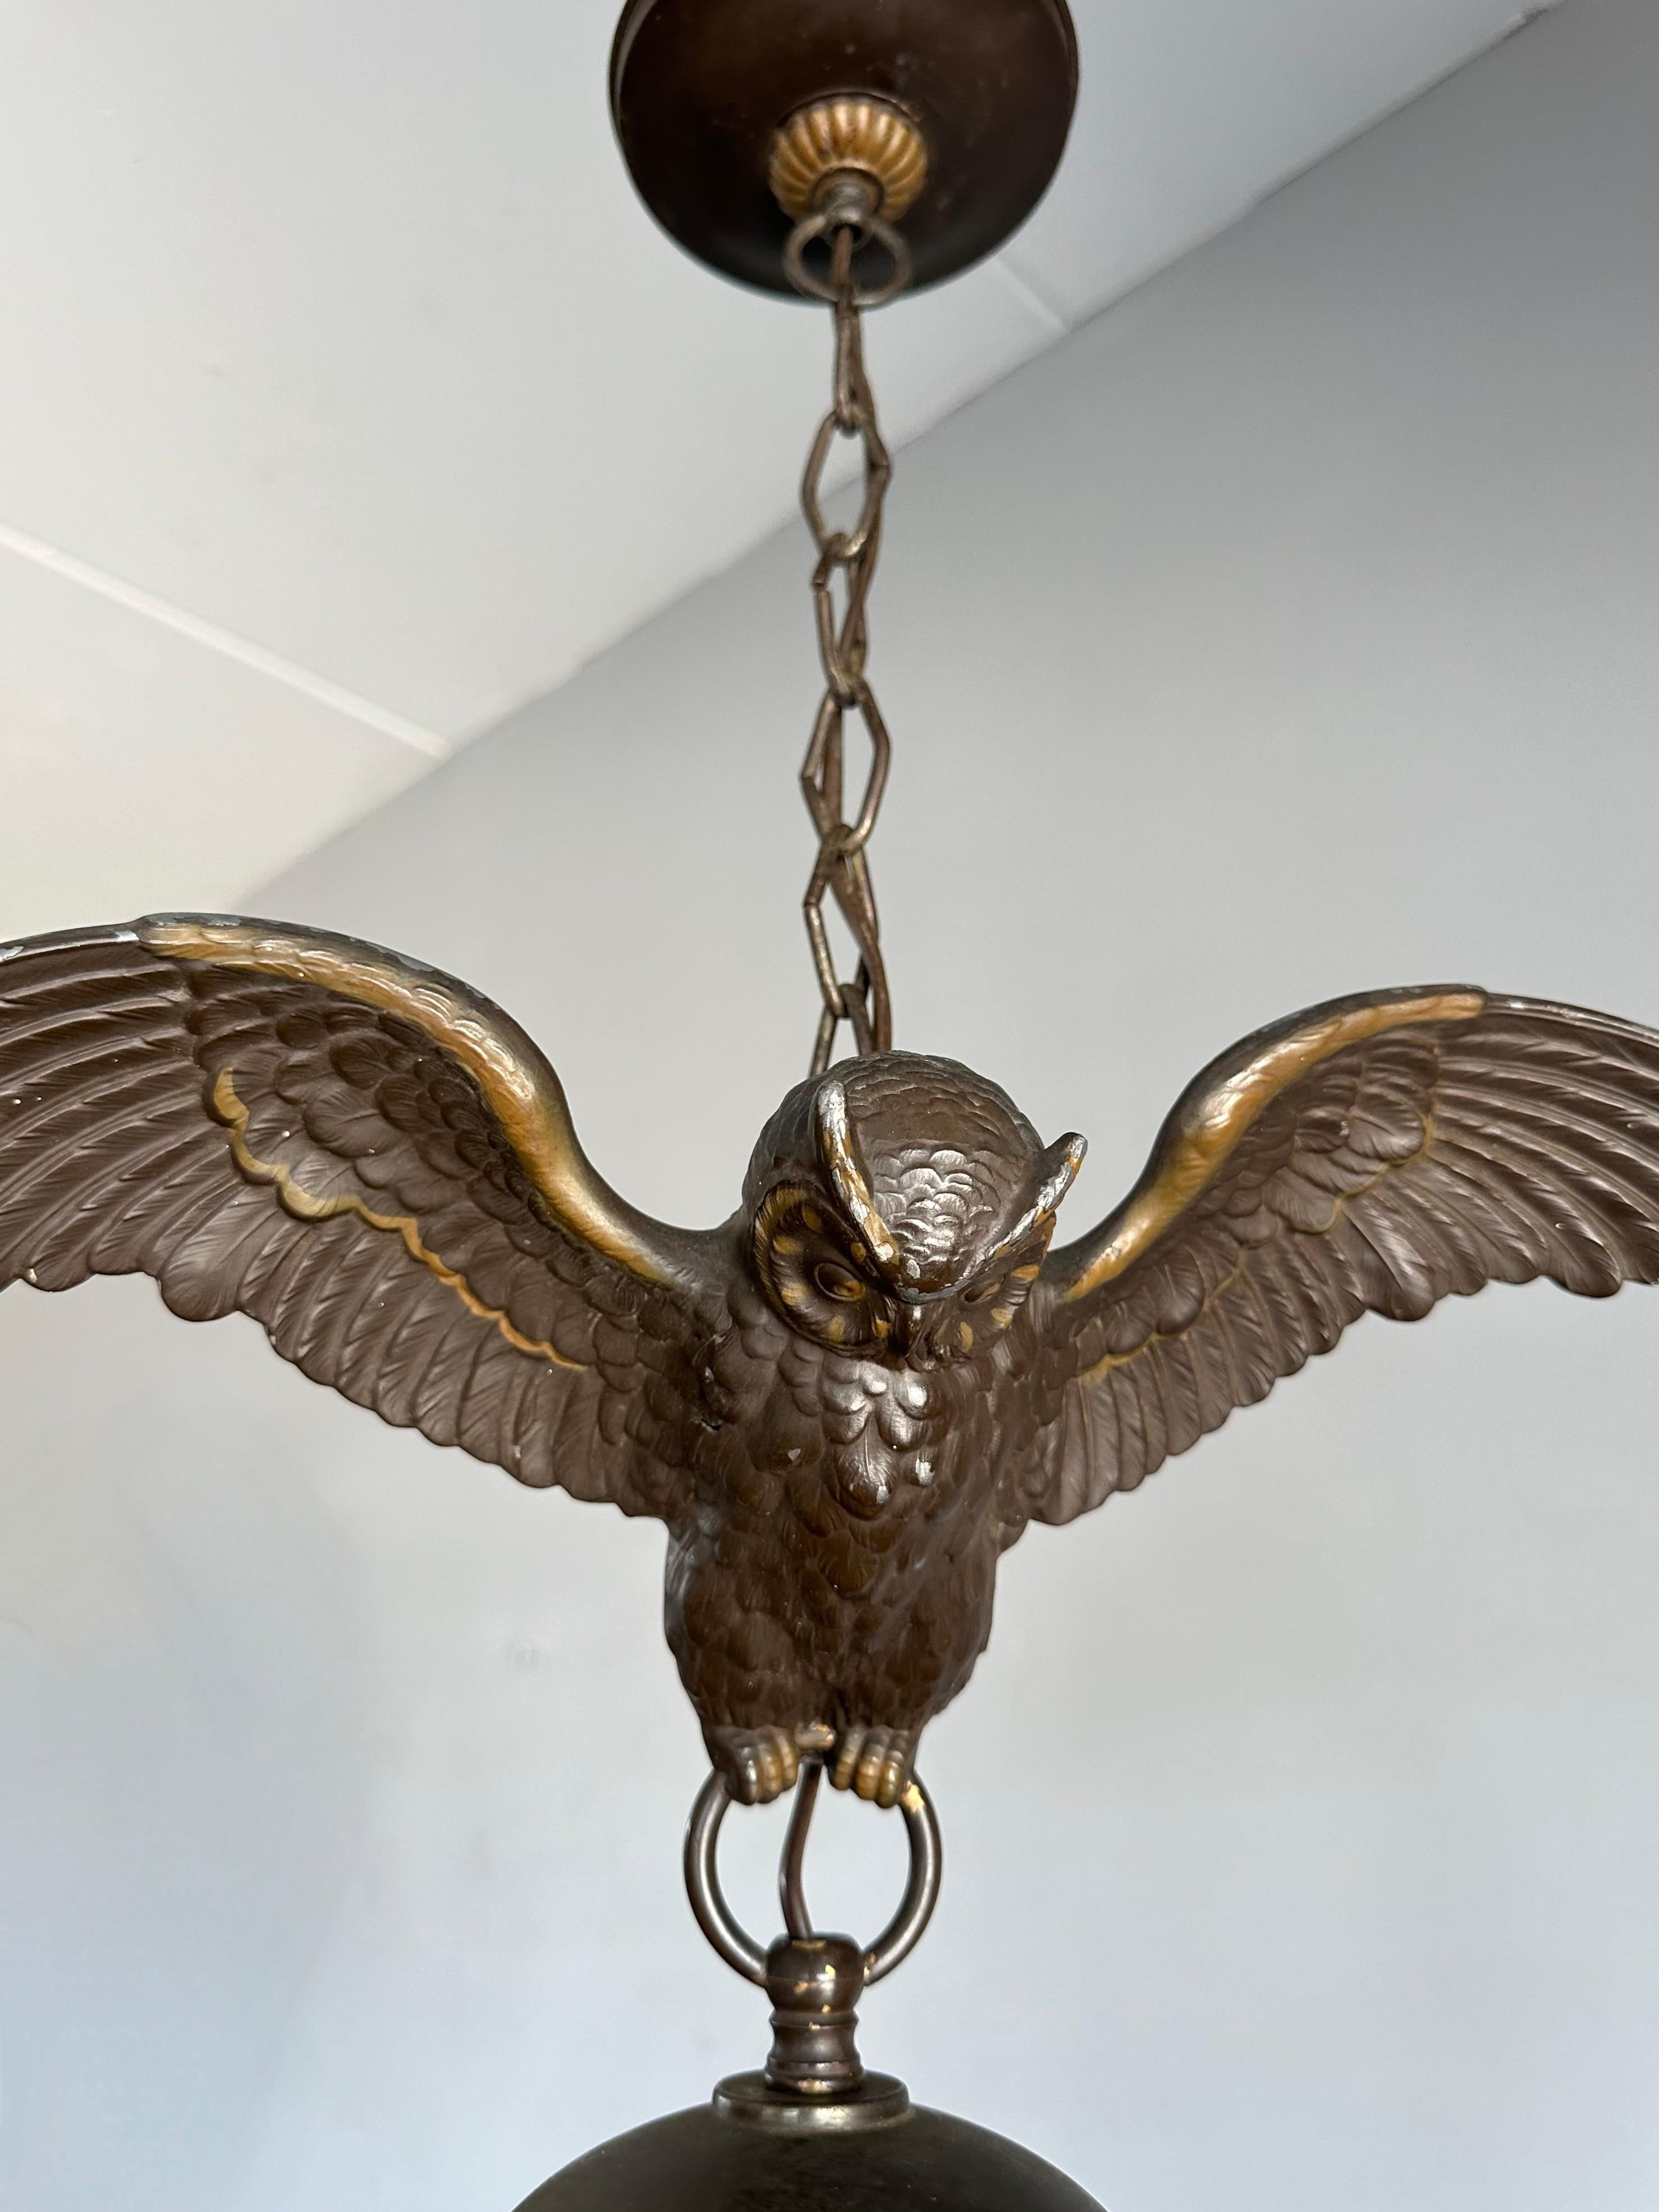 Arts and Crafts Era Flying Owl Sculpture Pendant Light or Lantern with Cut Glass For Sale 2